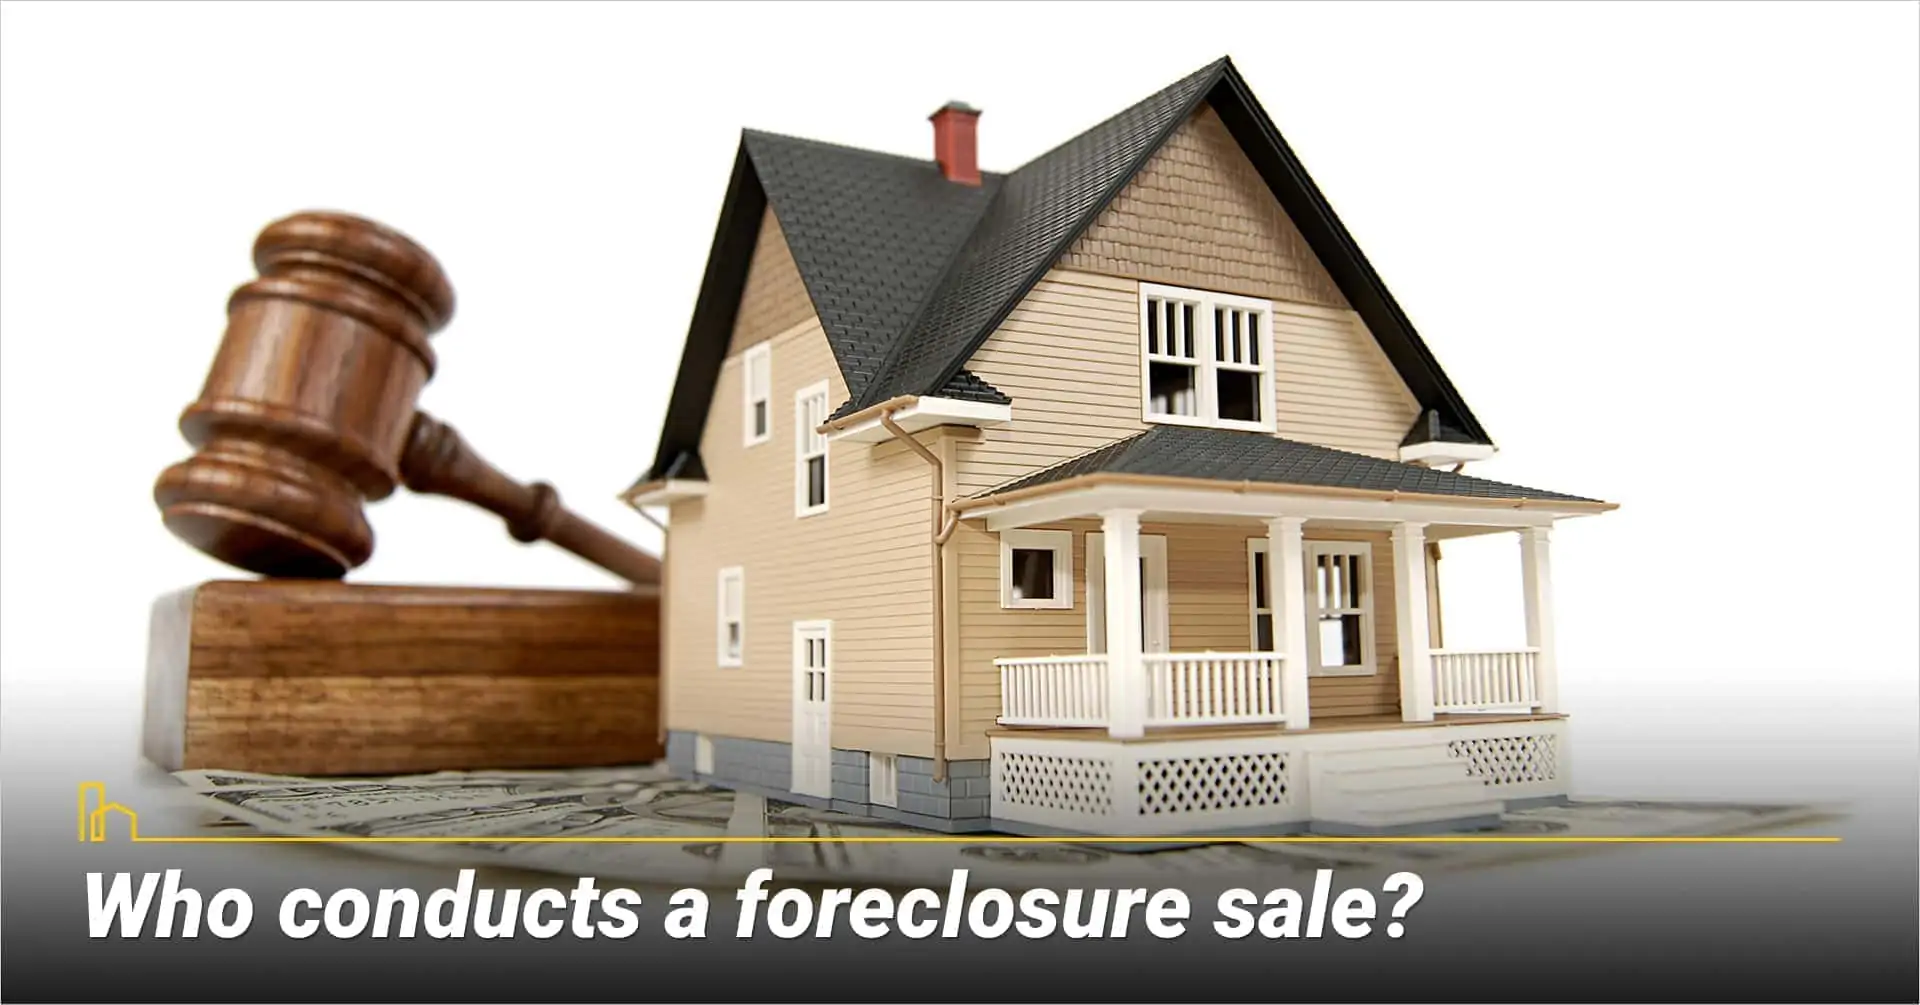 Who conducts a foreclosure sale? County Sheriff sells the foreclosed property